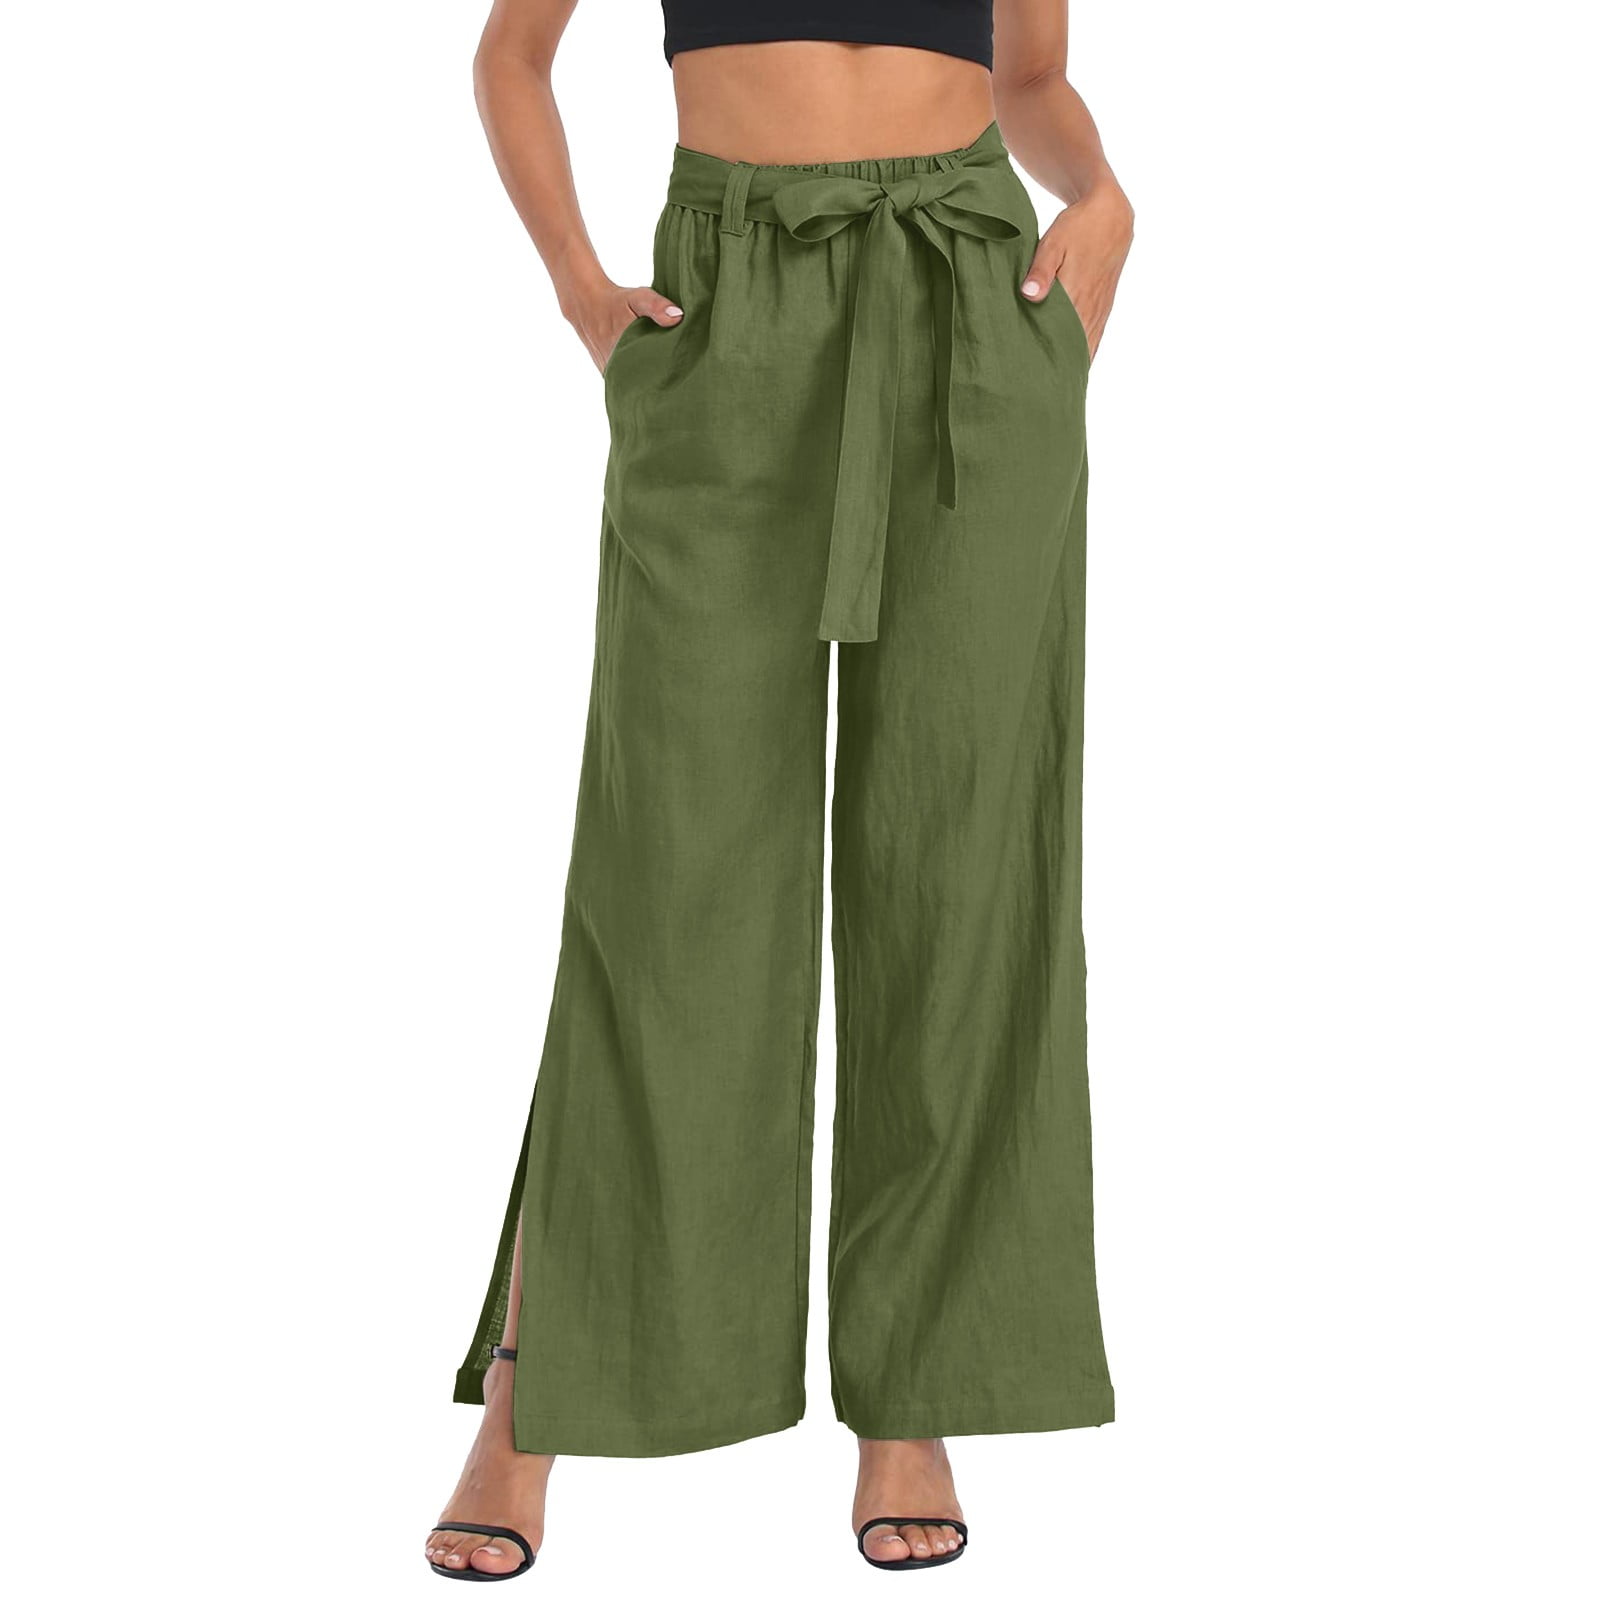  BZGTZT Women Linen Pants Boho Floral Print Loose Fit Palazzo  Pants Smocked High Waist Stretchy Wide-Leg Trousers with Pocket Green :  Sports & Outdoors